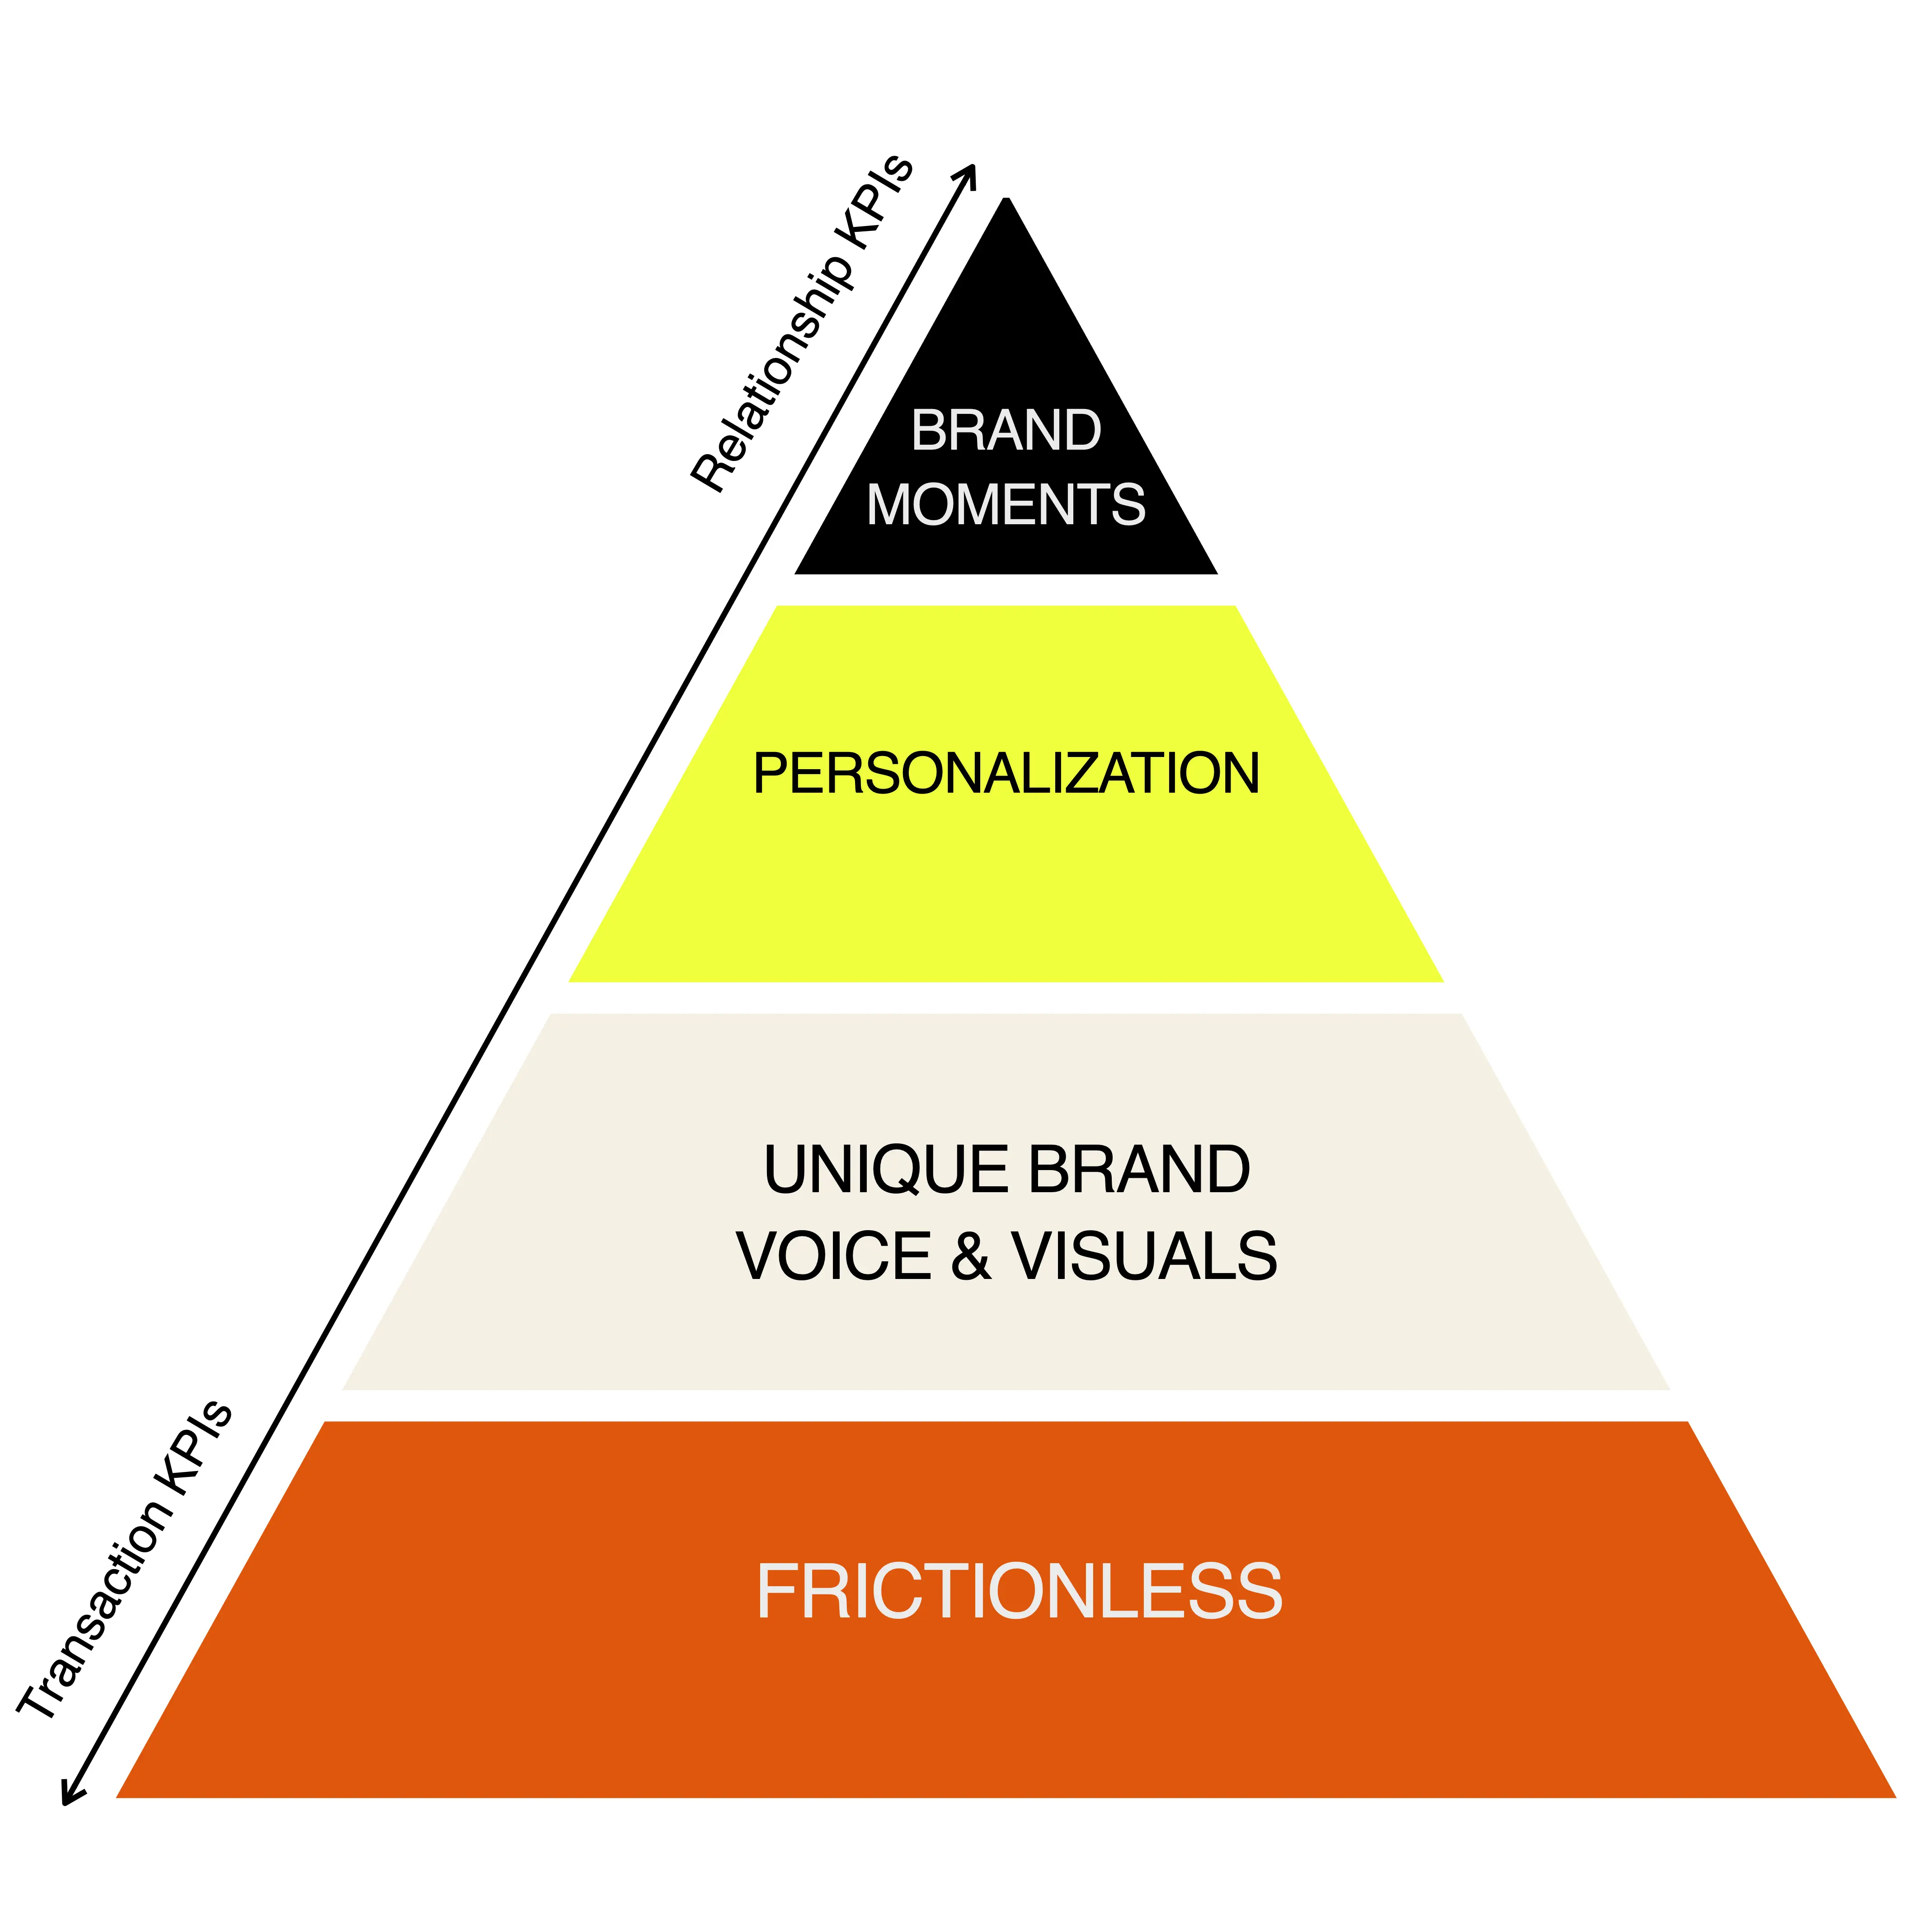 A pyramid displaying the following items from bottom to top: frictionless, differentiated tone of voice and visuals, personalized, and brand moments.